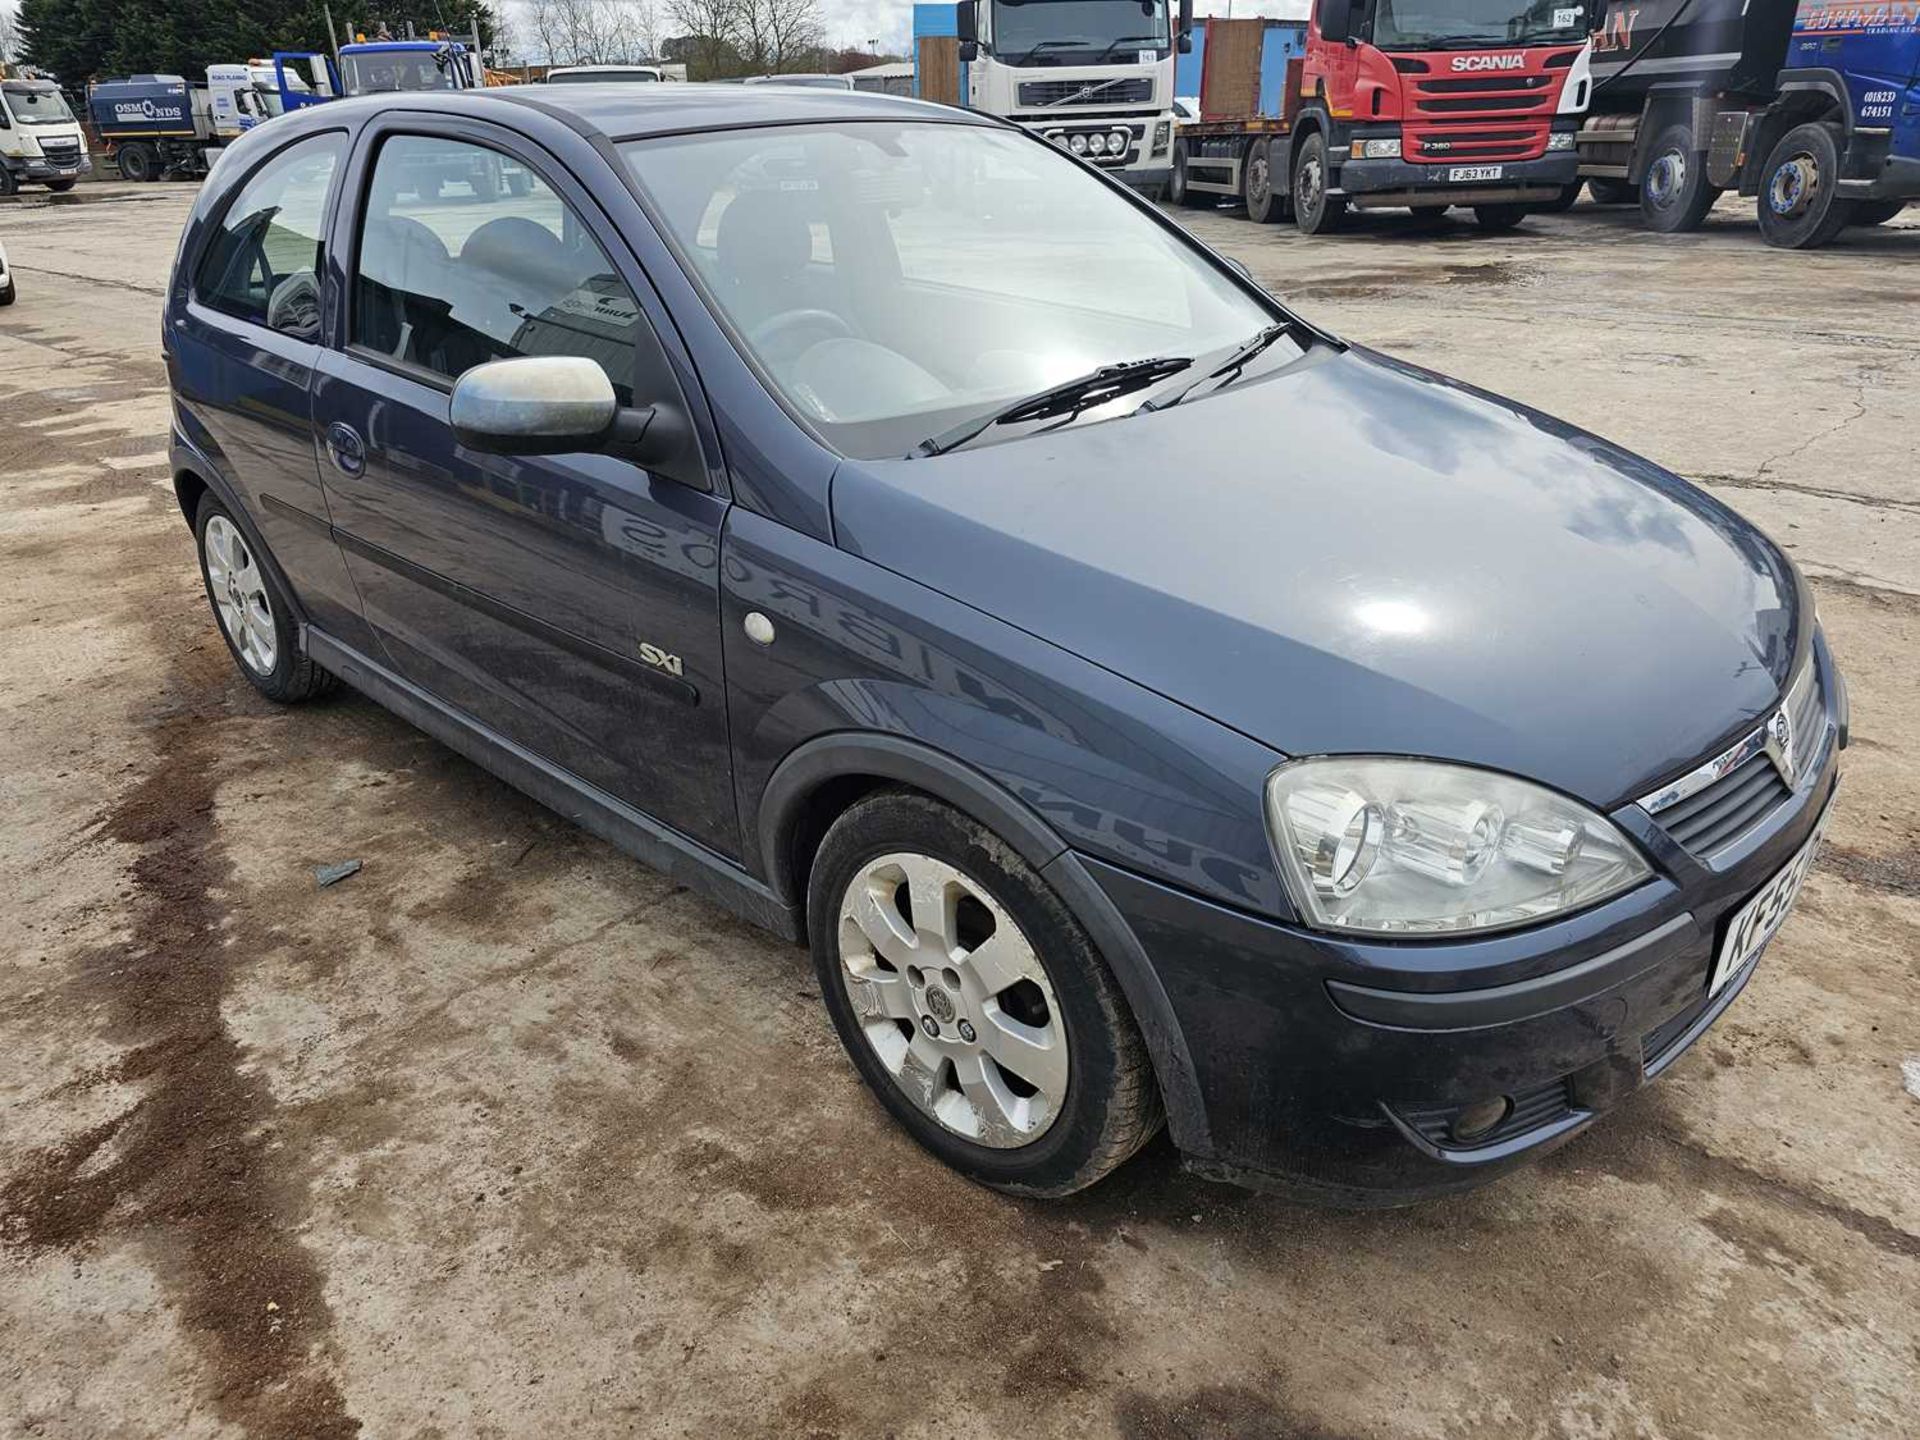 2005 Vauxhall Corsa SXi, 5 Speed, A/C (Reg. Docs. Available) - Image 7 of 24